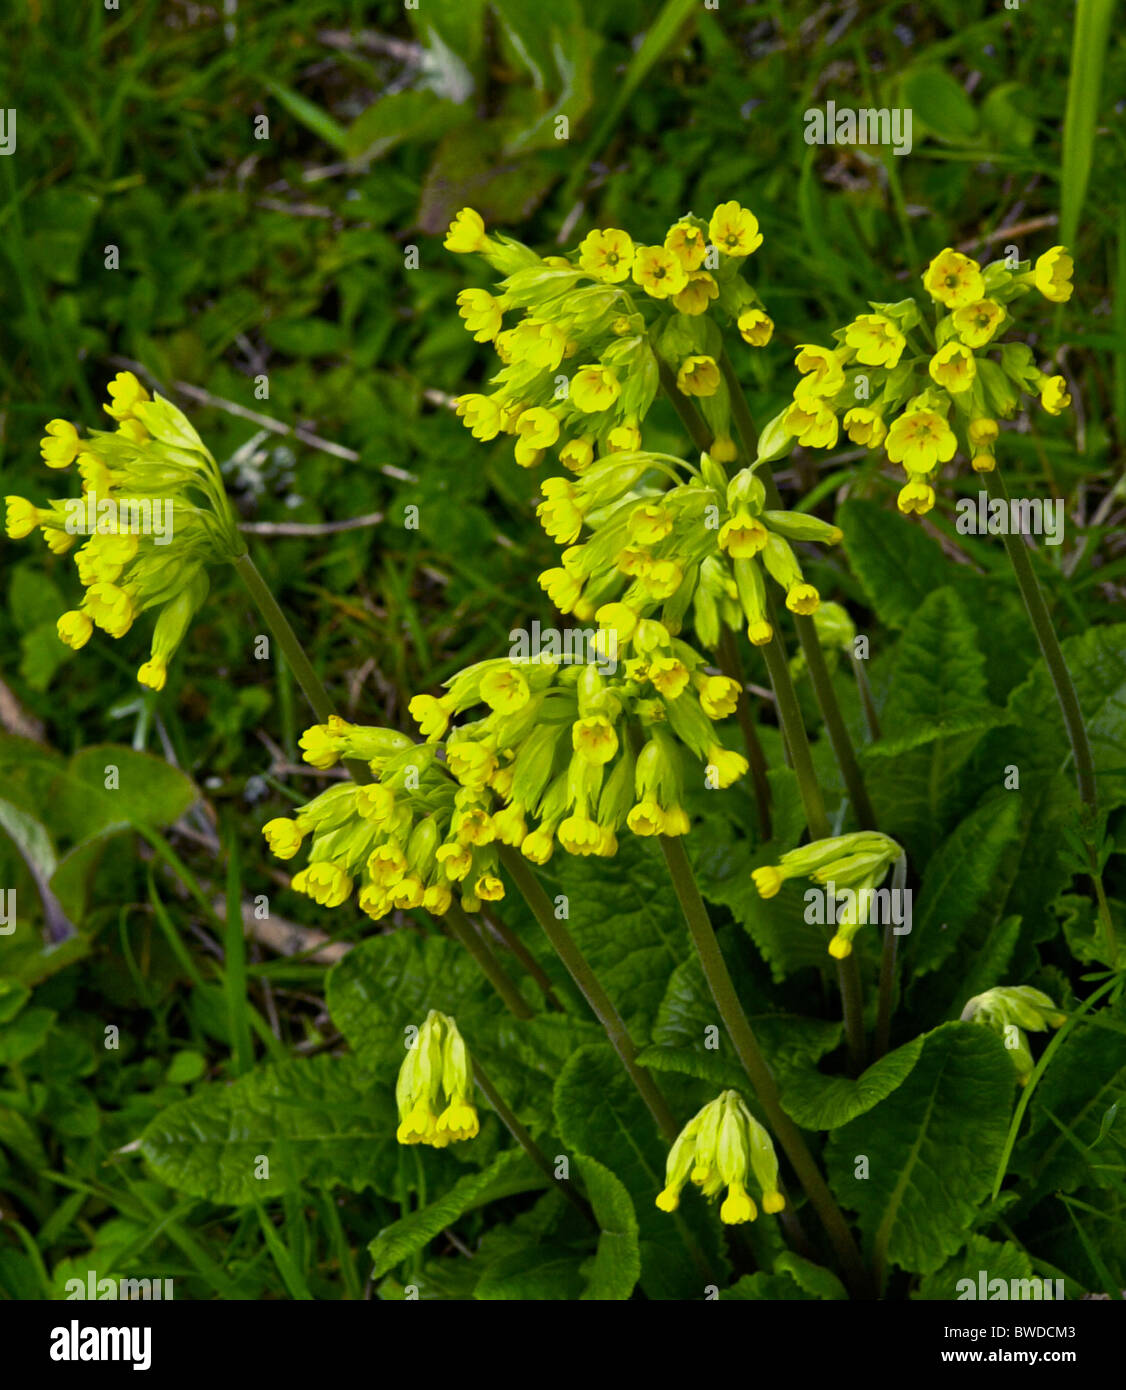 Primula veris (Cowslip; syn. Primula officinalis Hill) is a flowering plant in the genus Primula. Stock Photo